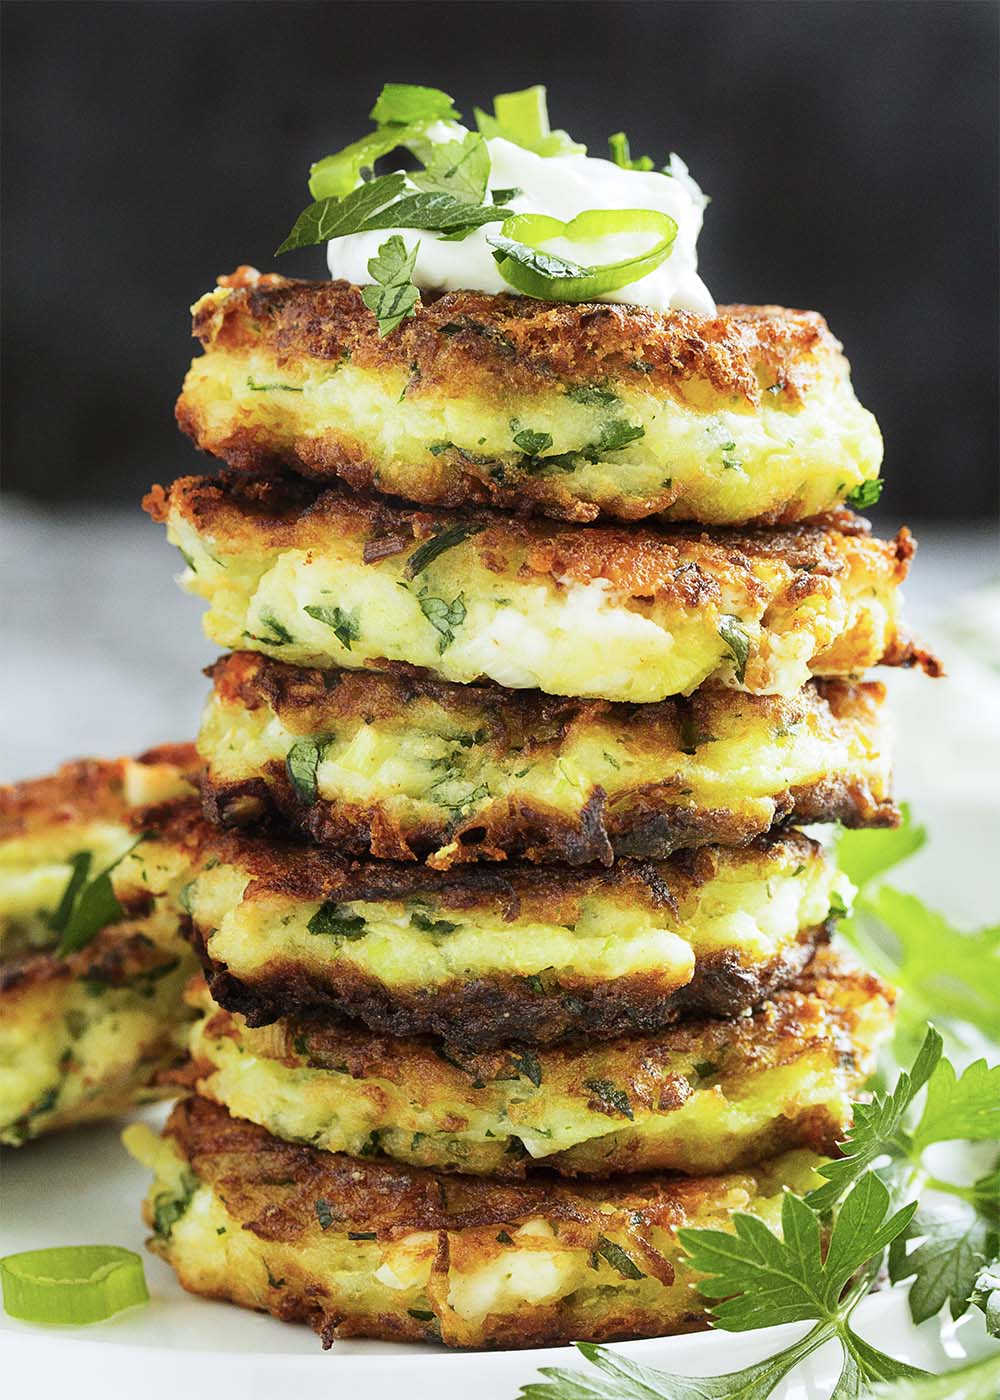 Shredded zucchini, salty feta, rice flour, and fresh parsley are featured in these vegetarian, gluten-free zucchini fritters. | justalittlebitofbacon.com